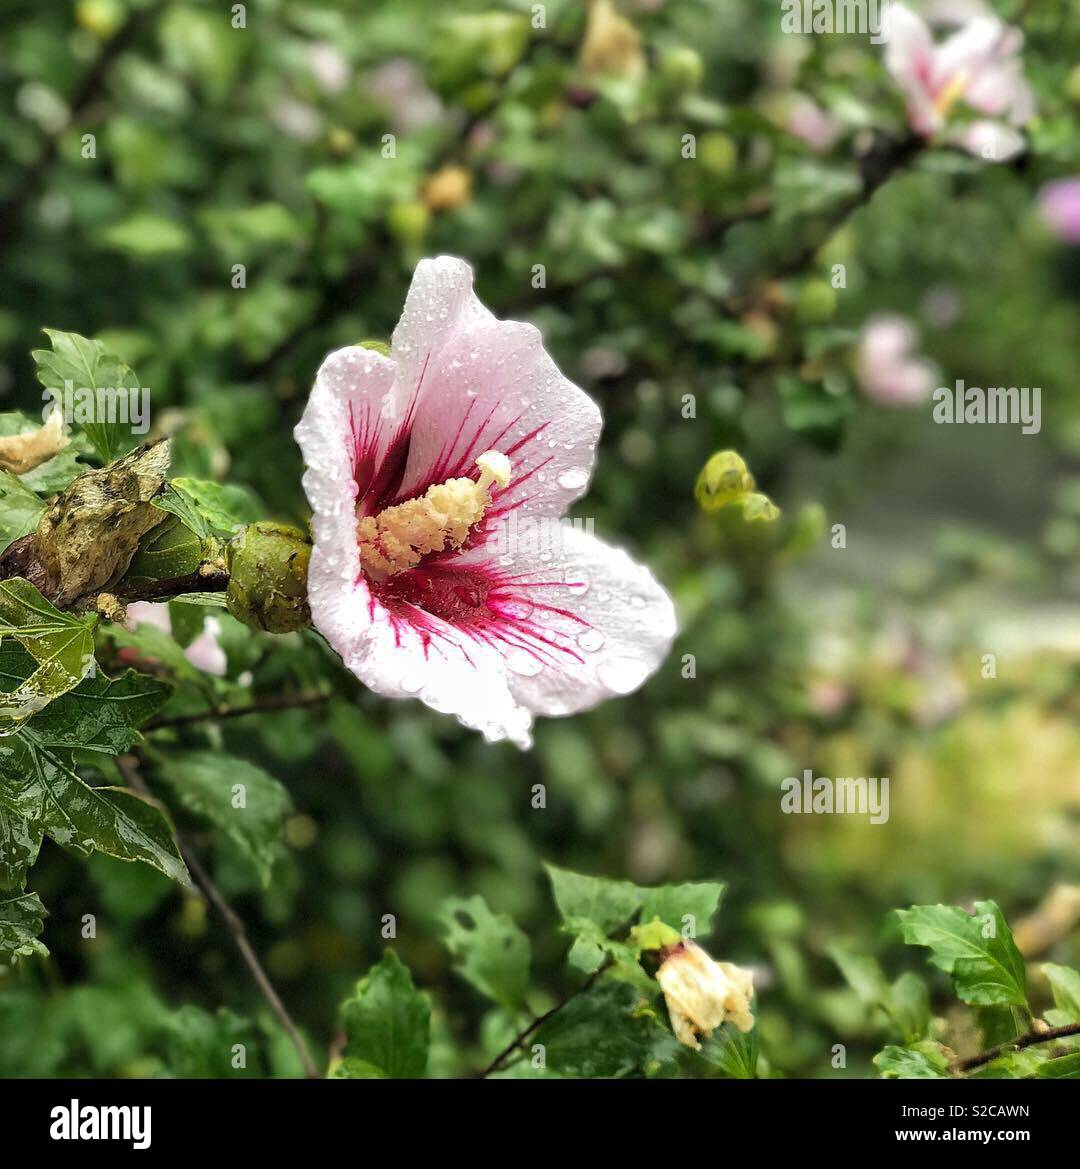 This picture is taken by IphoneX. Represent korea. They called ‘Rose of sharon’. Very beautiful flower. Flower language is ‘sincerity’ Stock Photo